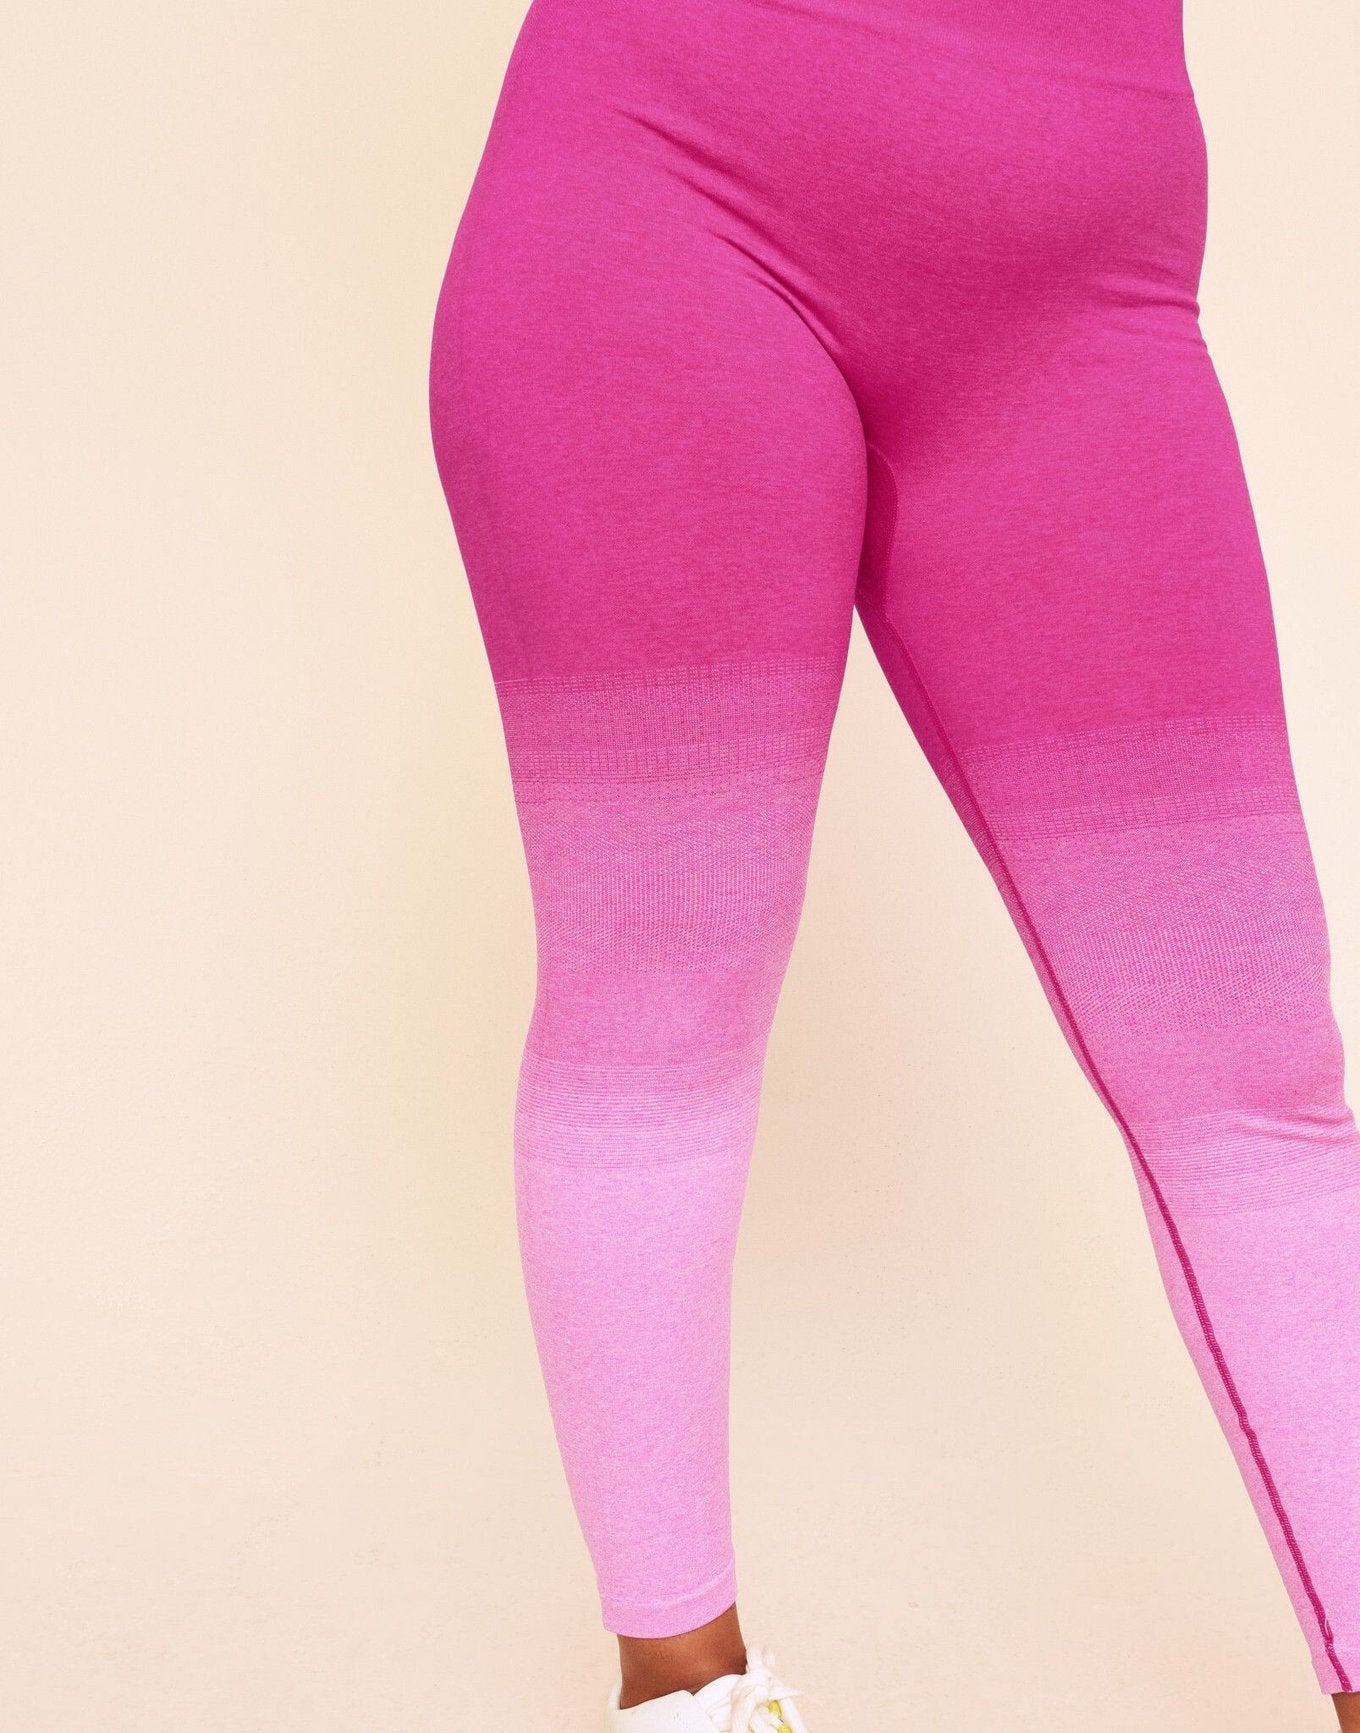 Earth Republic Lilah Ombre Full Legging Leggings in color Solid 03 - Ombre Pink and shape legging